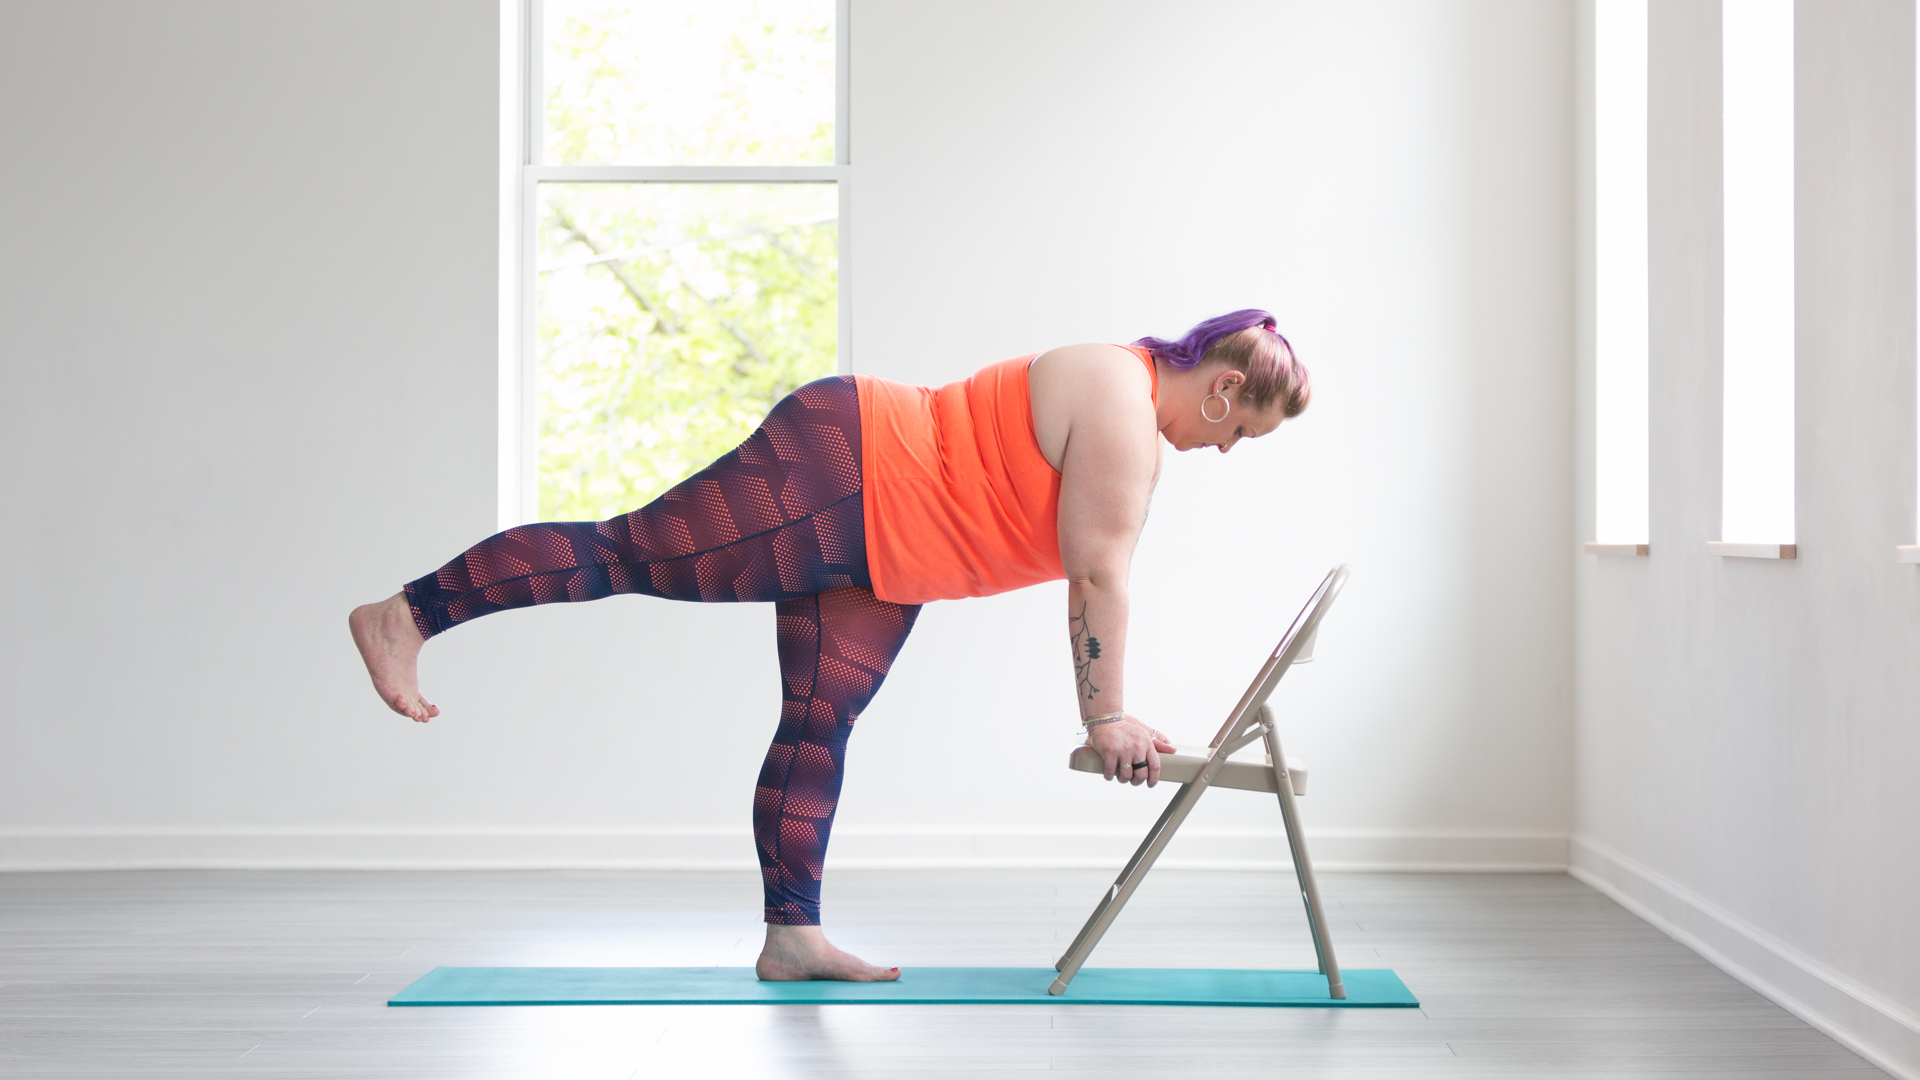 Yoga For Scoliosis: Poses That Help & Yoga Poses To Avoid